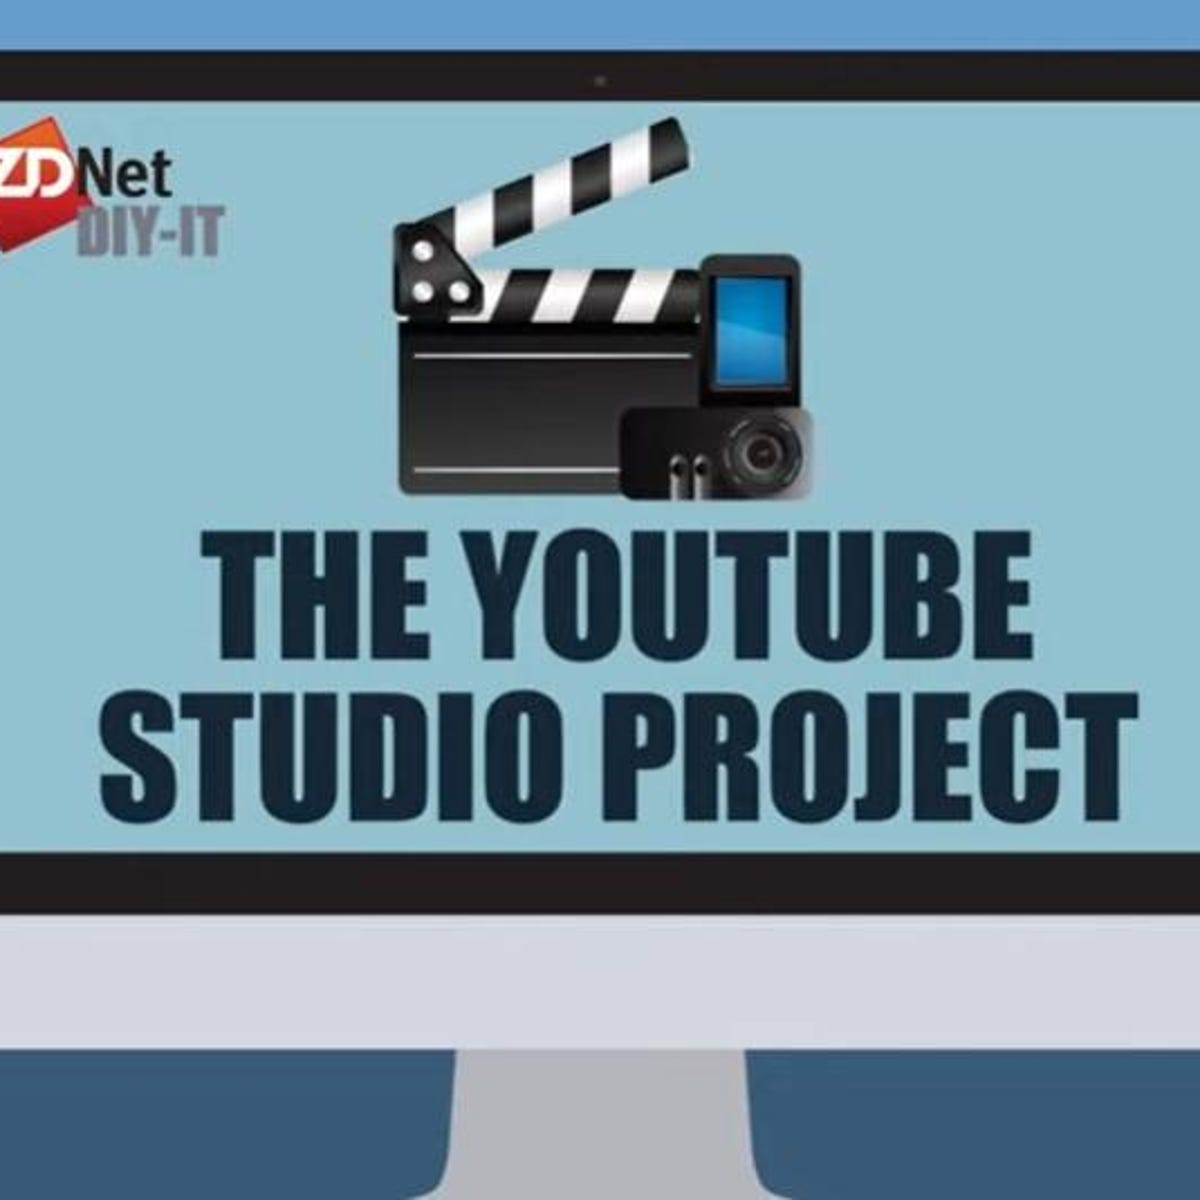 Building A Youtube Studio Upgrading To Full Broadcast Quality Video For Under 3 000 Zdnet